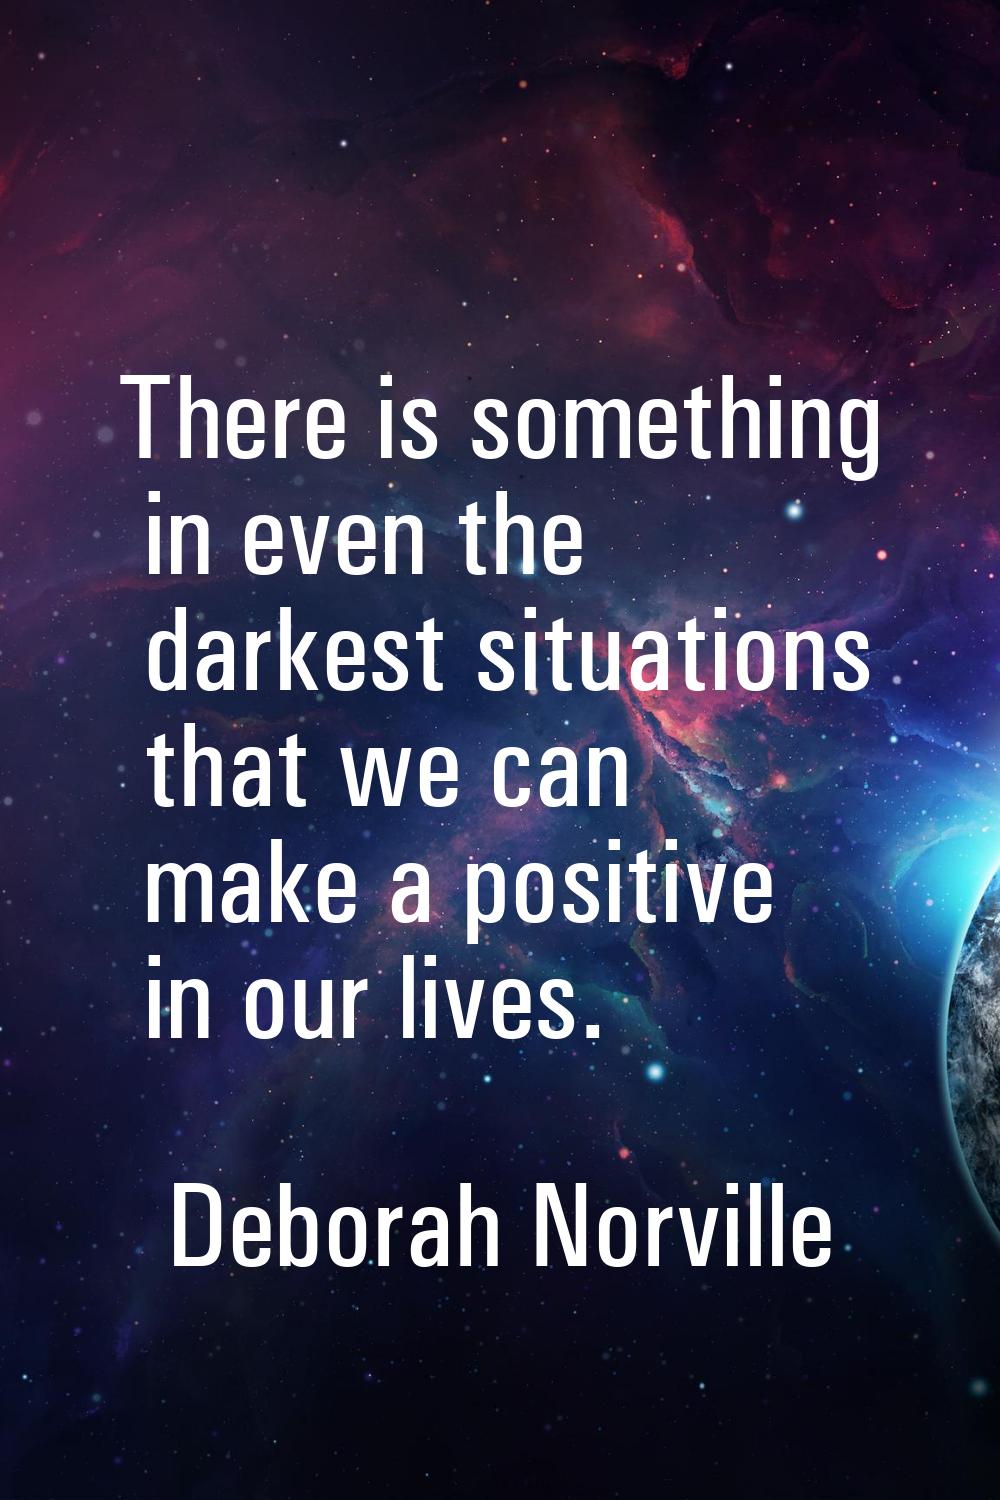 There is something in even the darkest situations that we can make a positive in our lives.